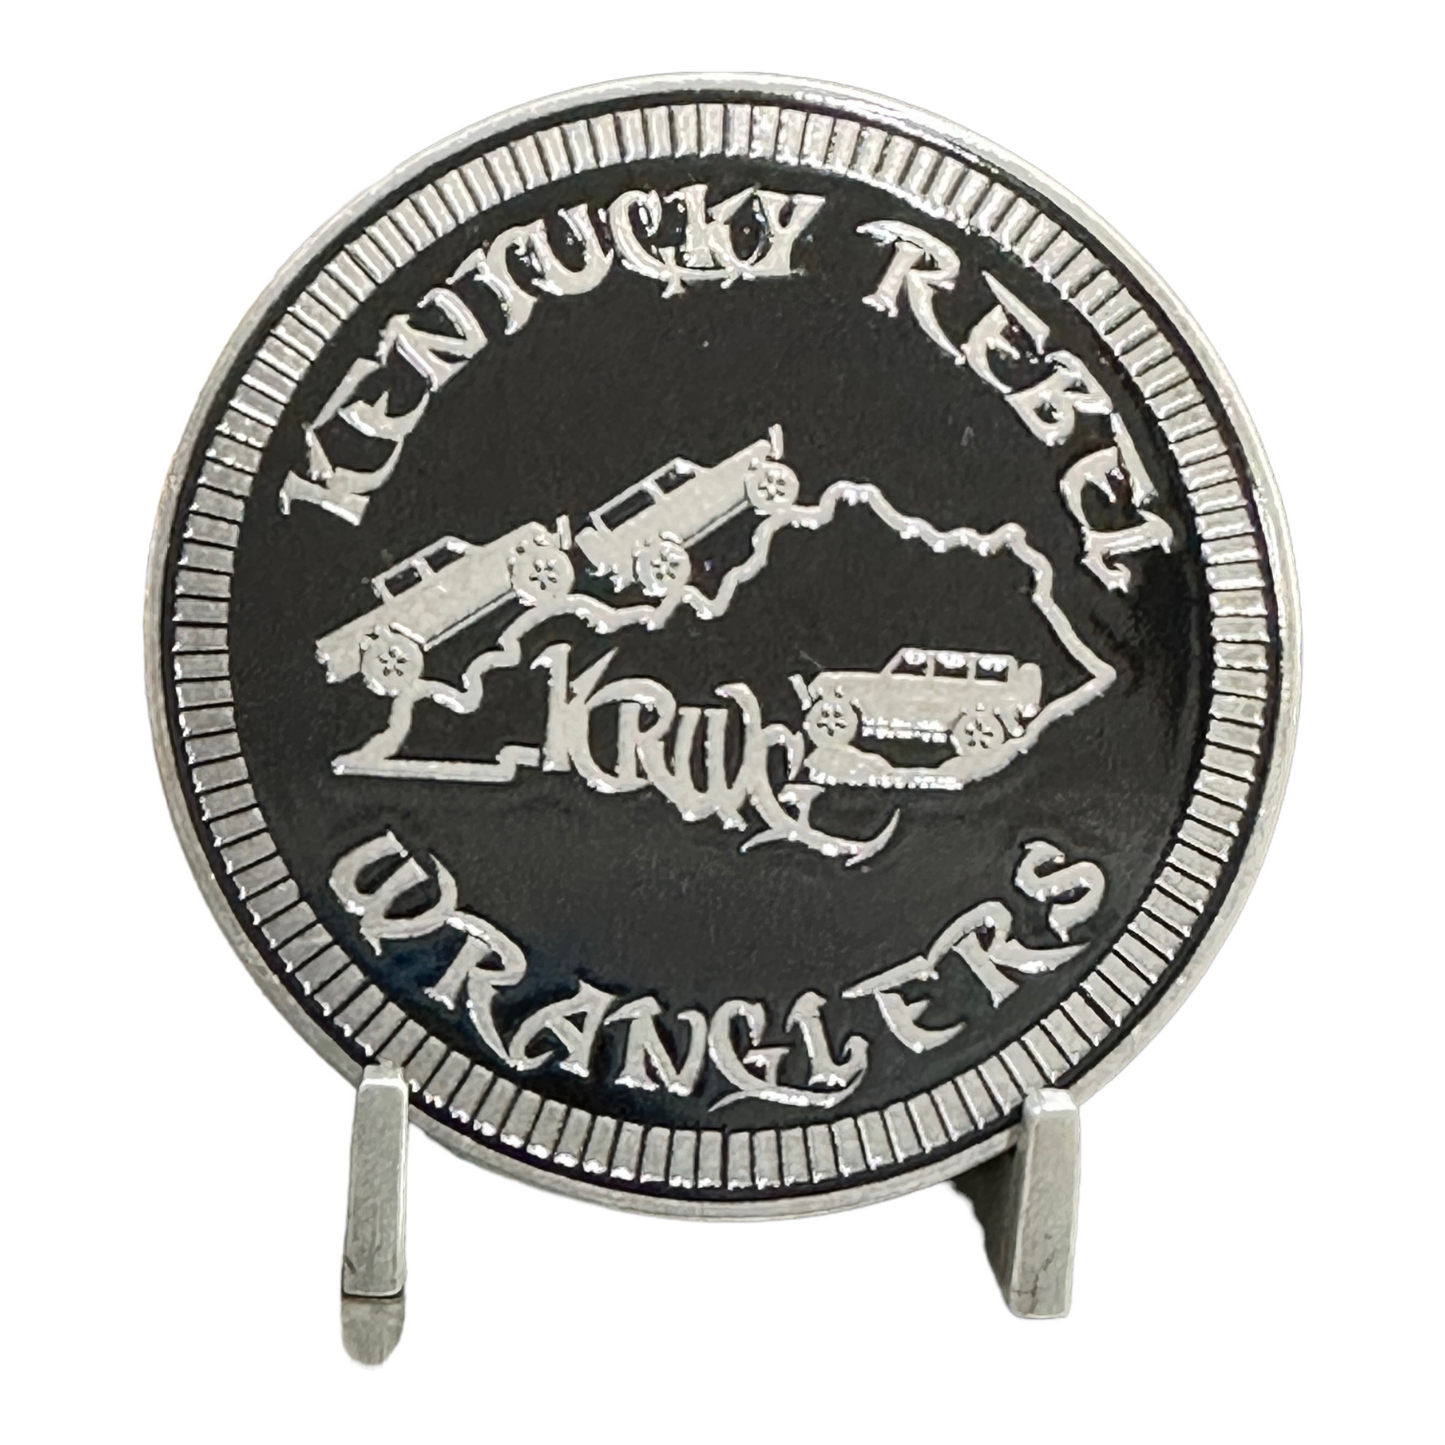 Kentucky Rebel Wranglers (Multiple Colors Available)